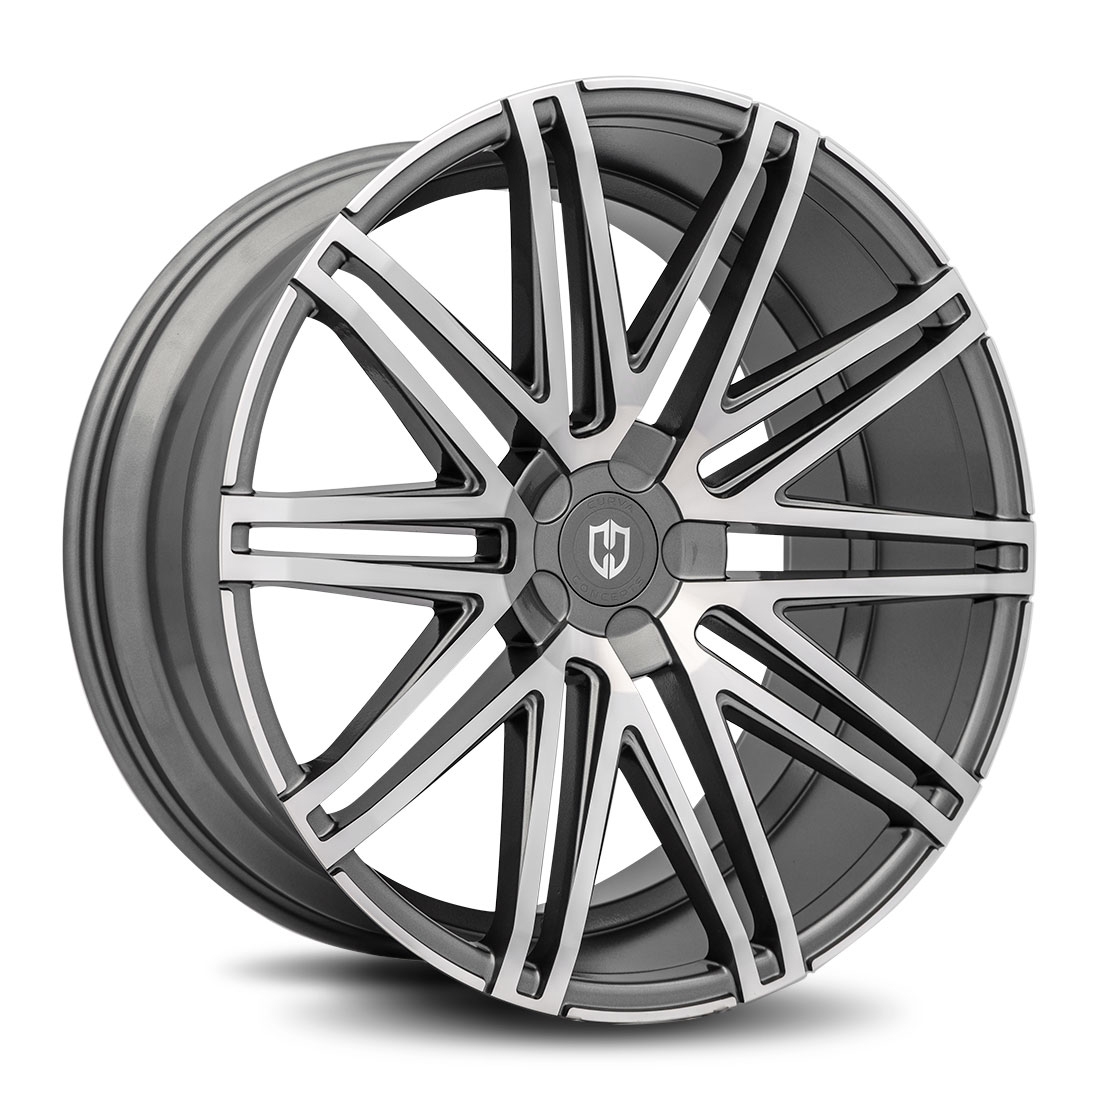 Curva Concepts C48 Aftermarket Wheels 22 Inch Gunmetal Machined Face